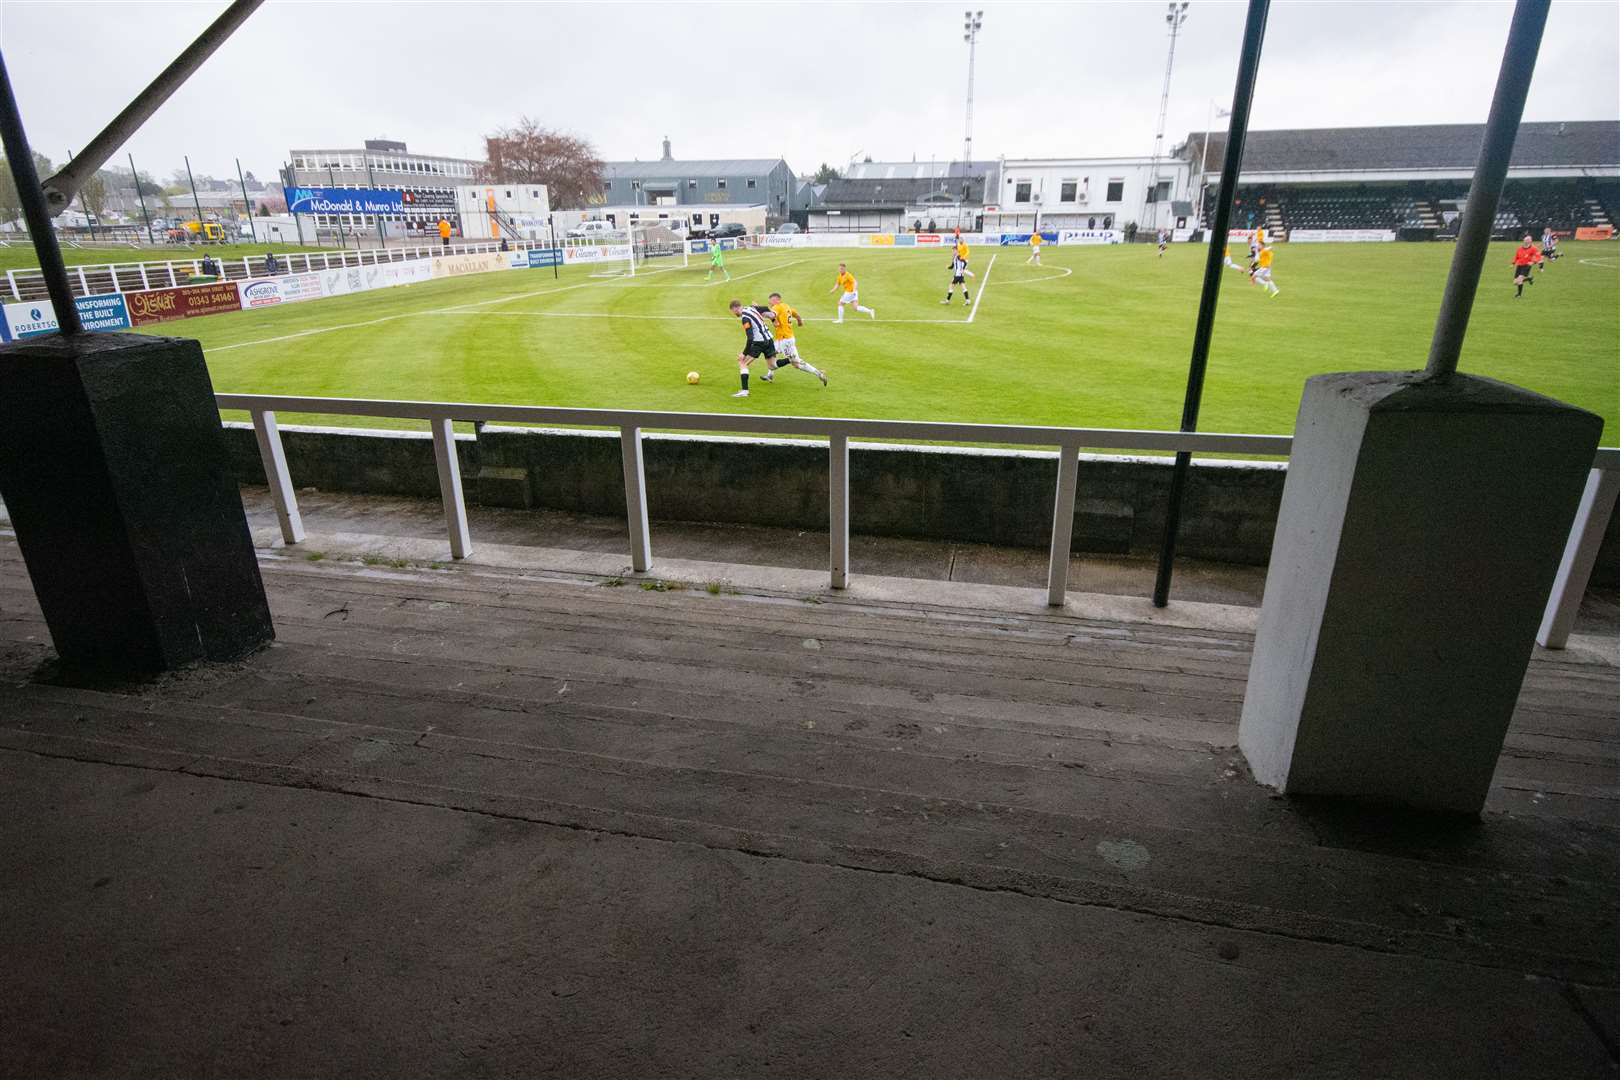 Elgin City have kindly agreed to donate use of their stadium for the charity match. Picture: Daniel Forsyth